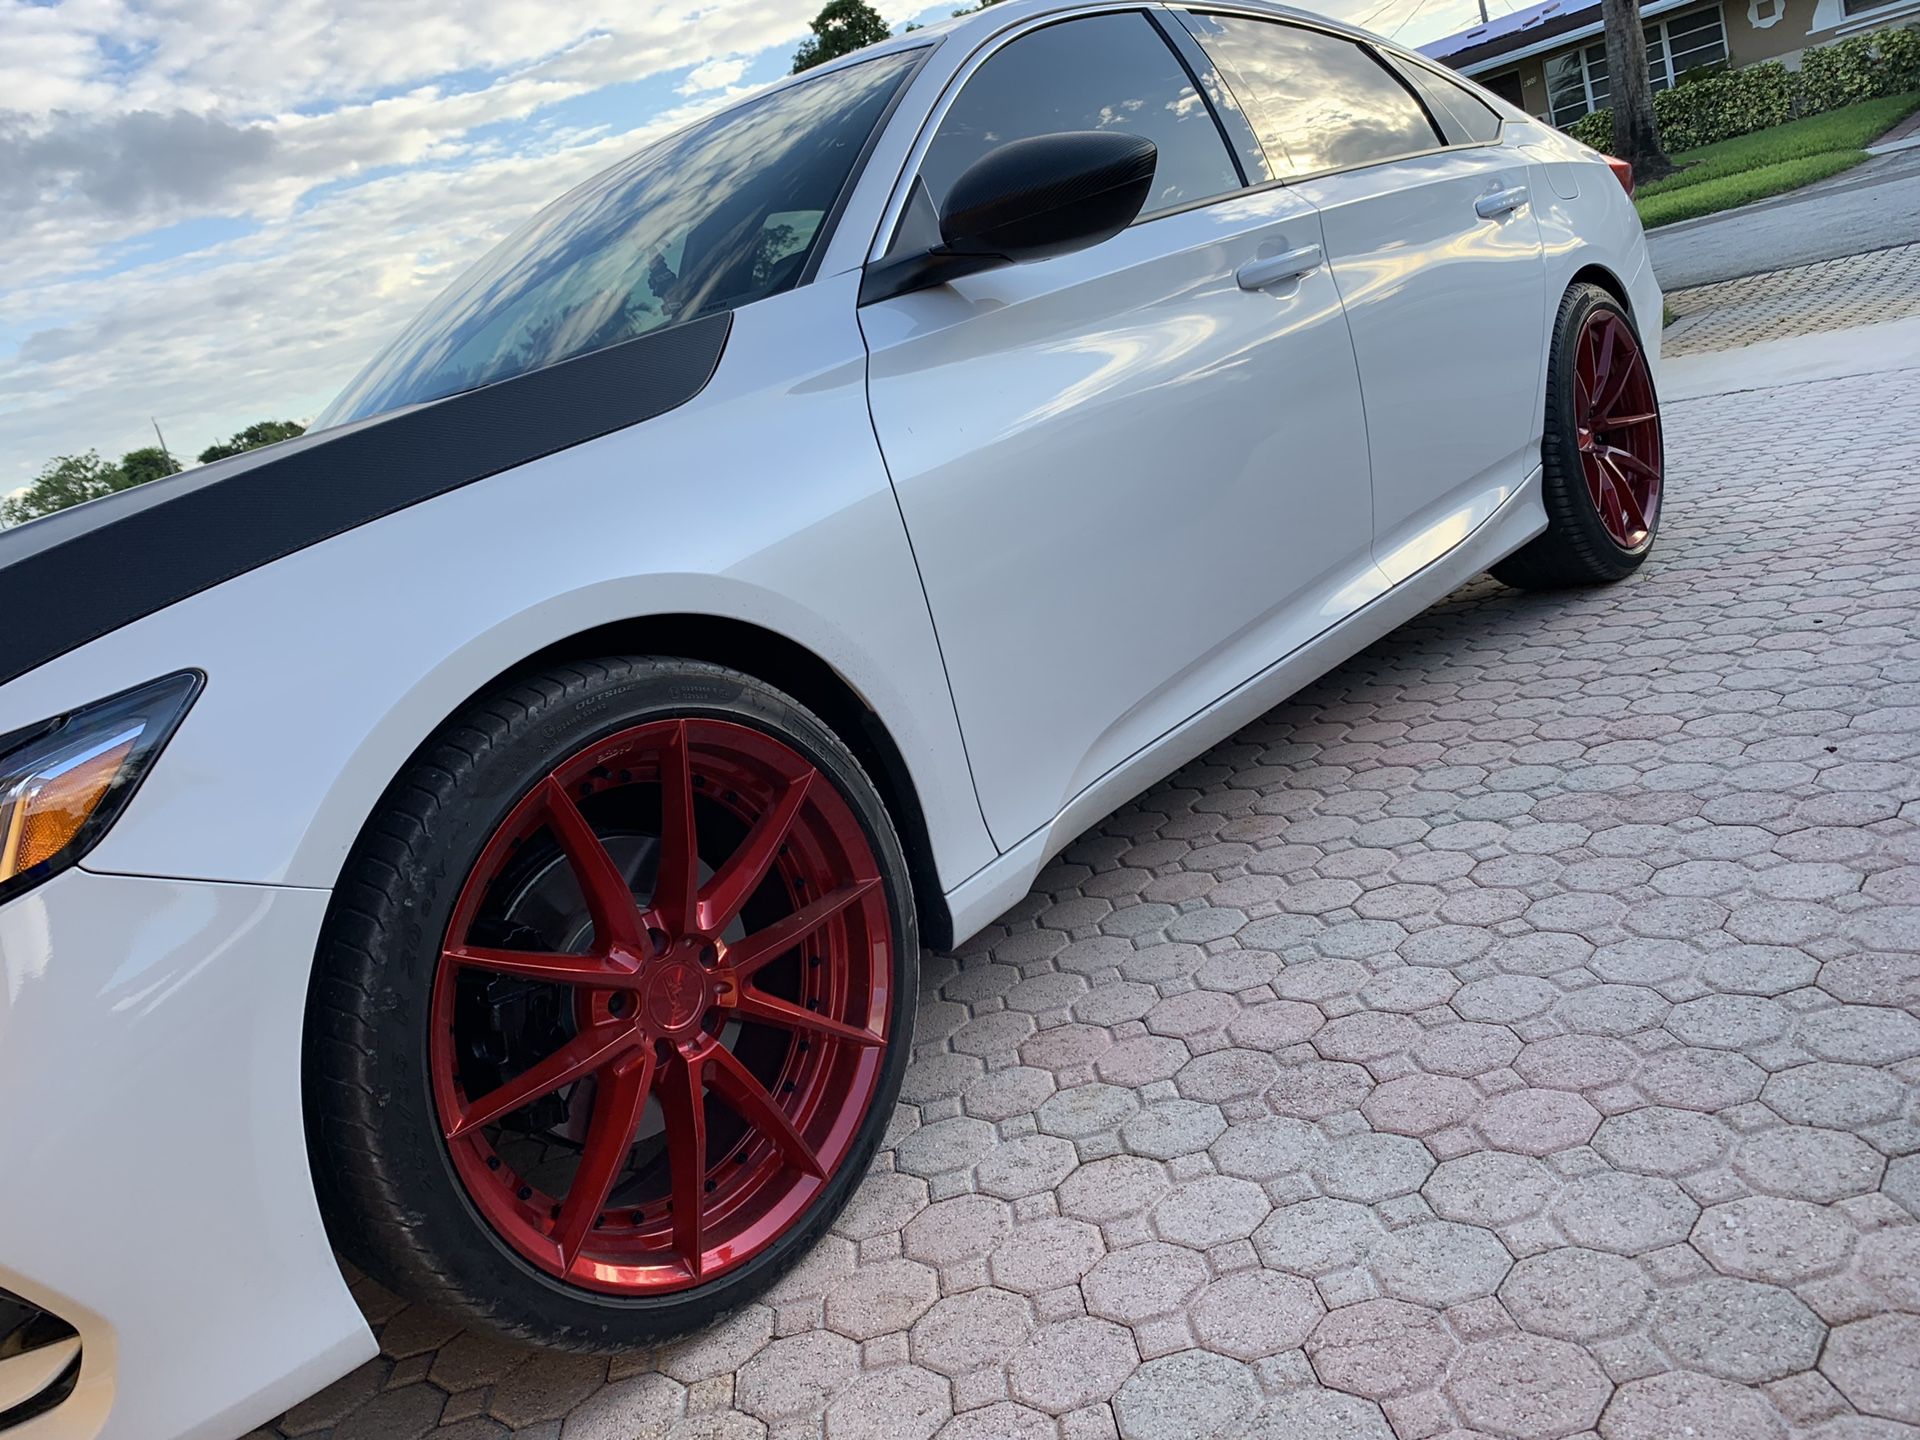 20 Niche Wheels Staggered 5x4.5 candy red rims 5x114.3 pirelli tires